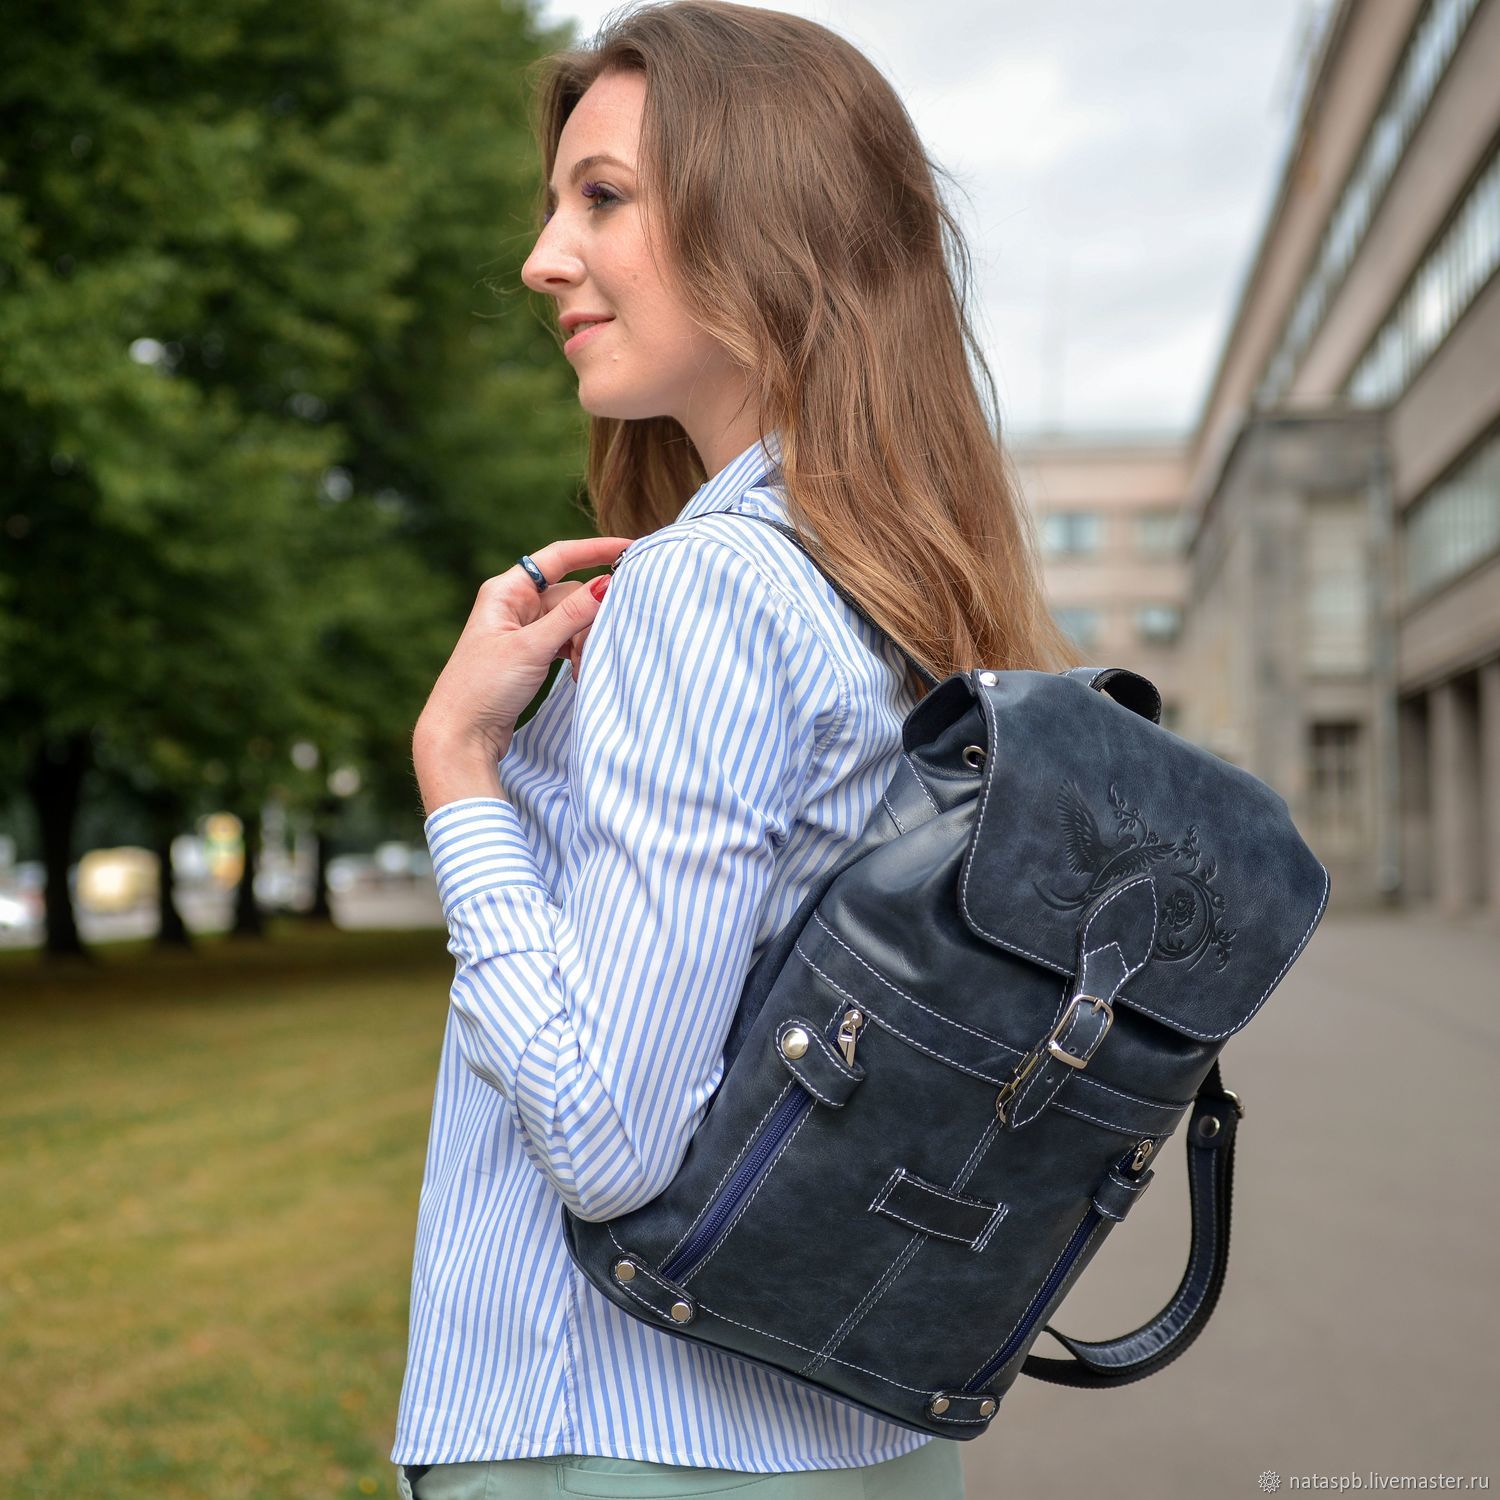 Backpack leather blue women's Blue bird Fashion R13p-661, Backpacks, St. Petersburg,  Фото №1